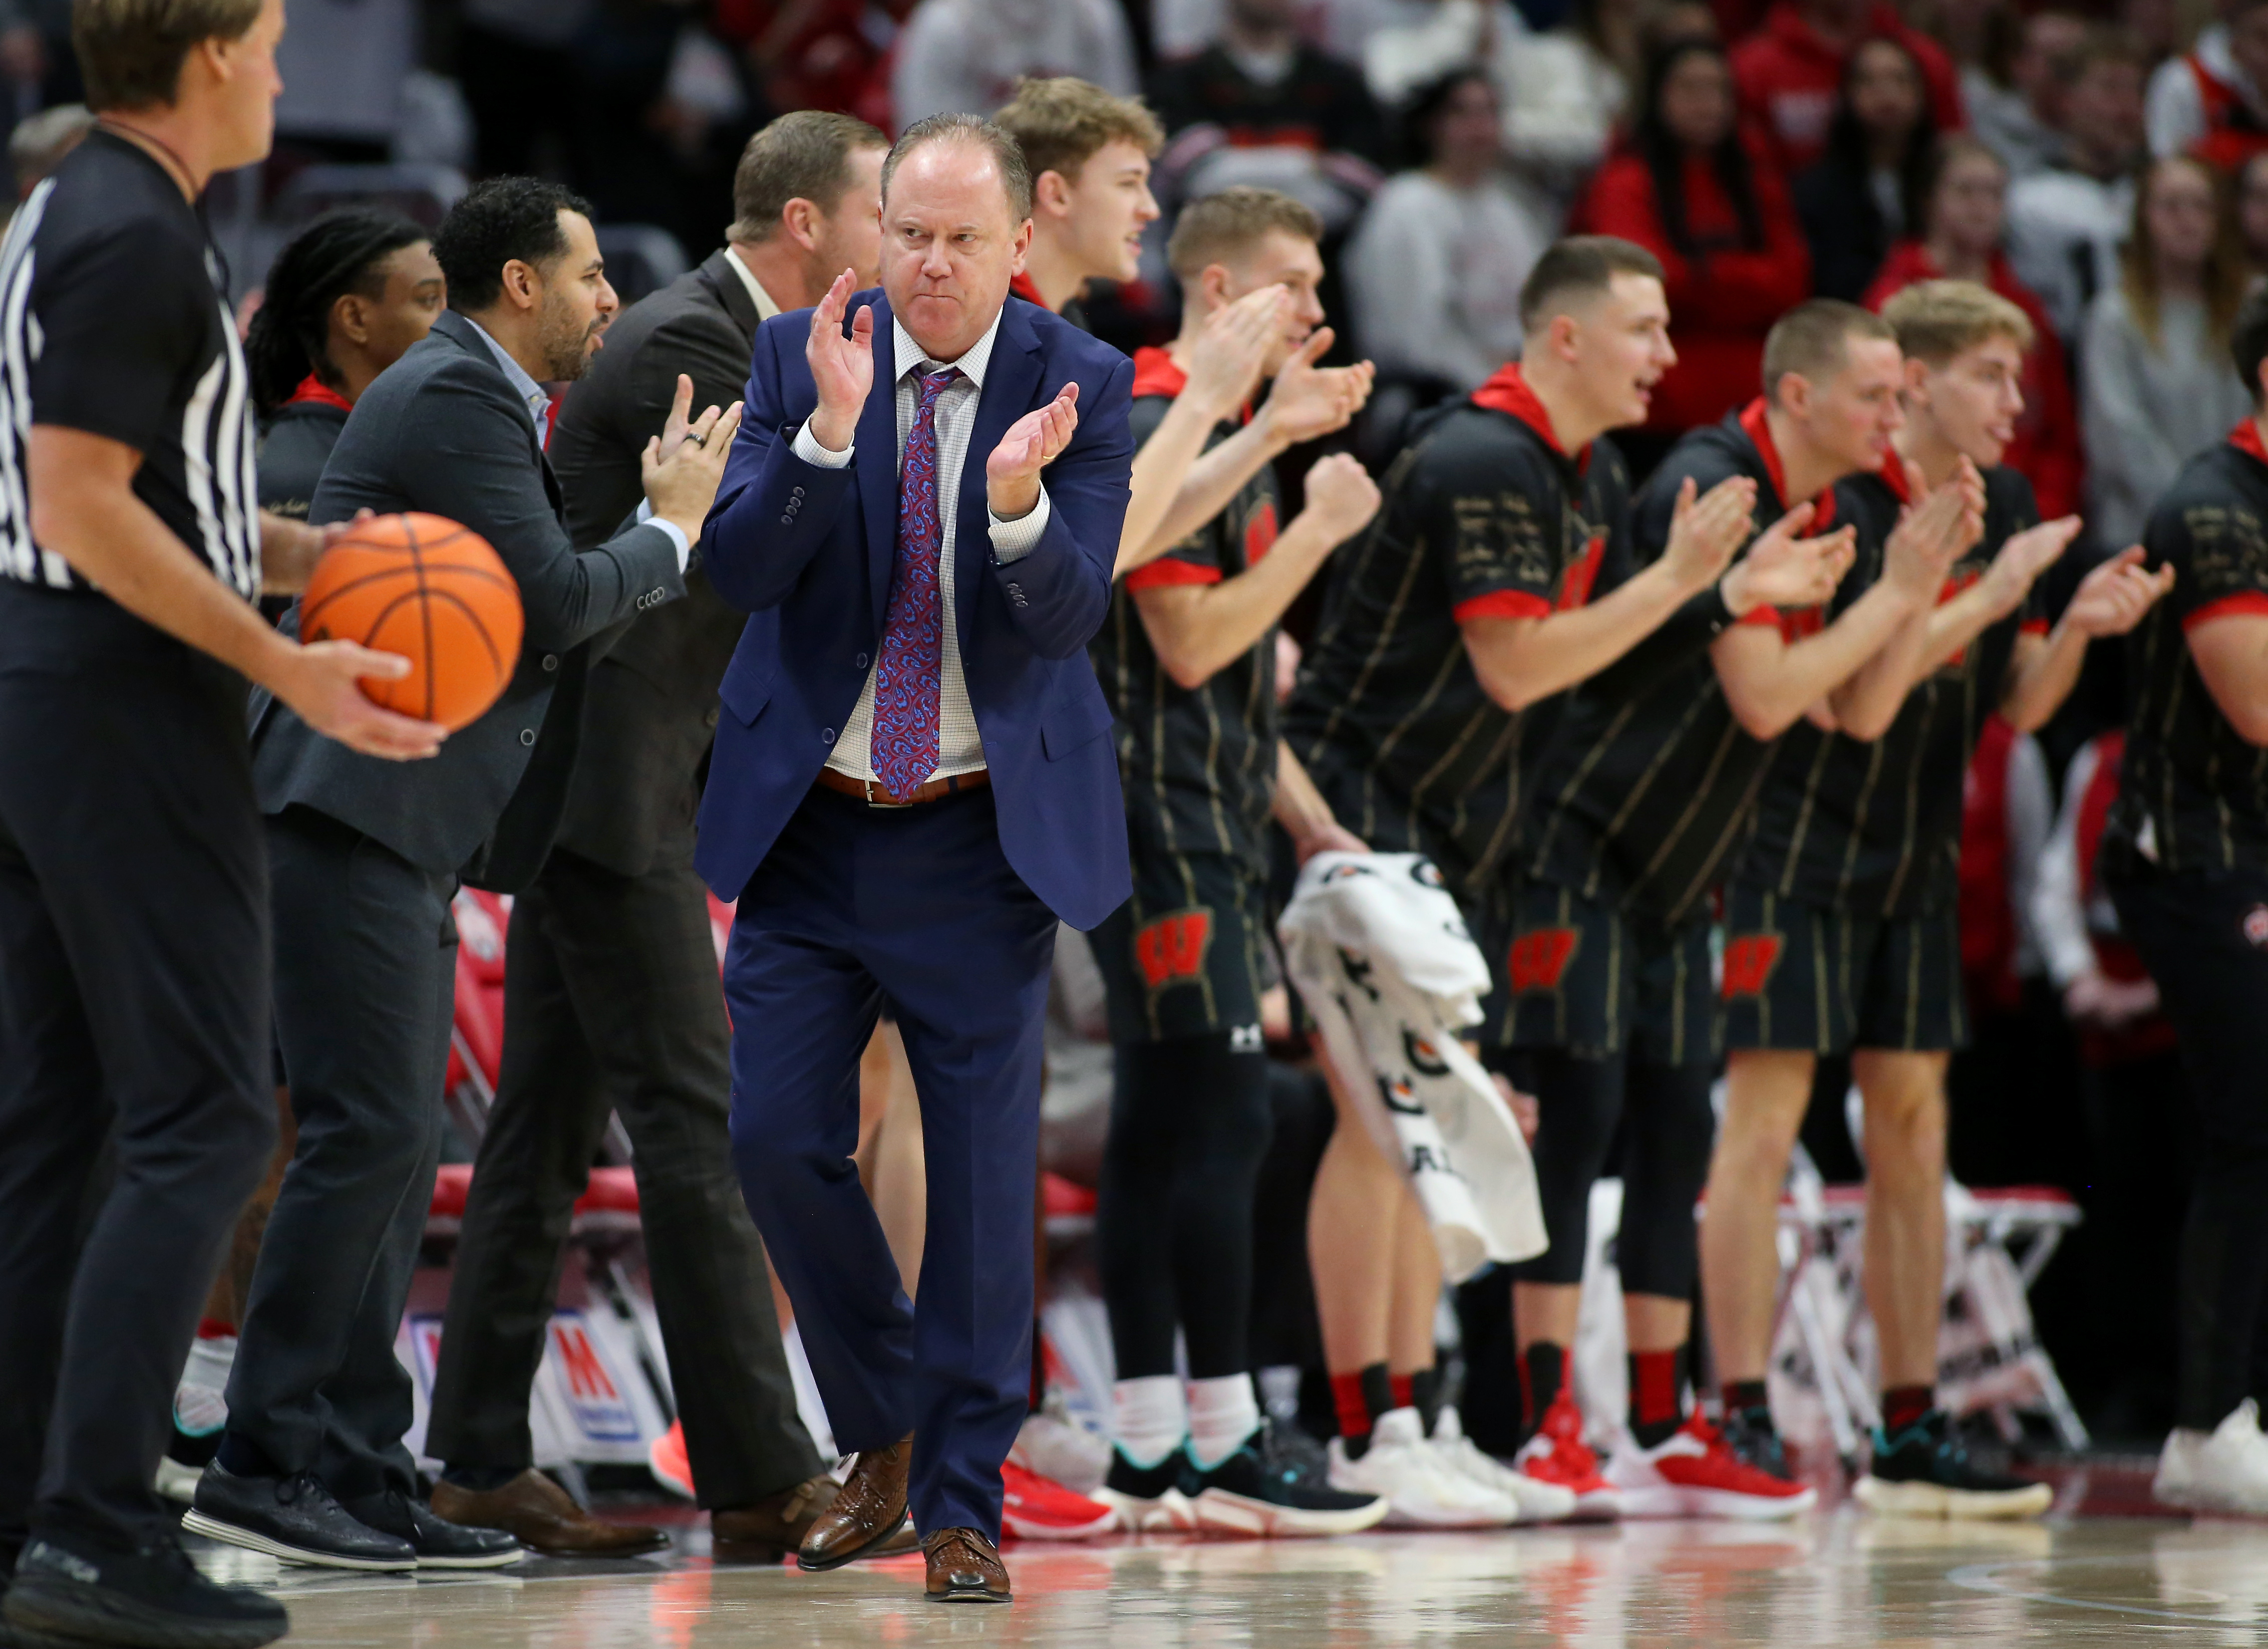 Wisconsin Badgers head coach Greg Gard celebrates during the first half against the Ohio State Buckeyes at Value City Arena